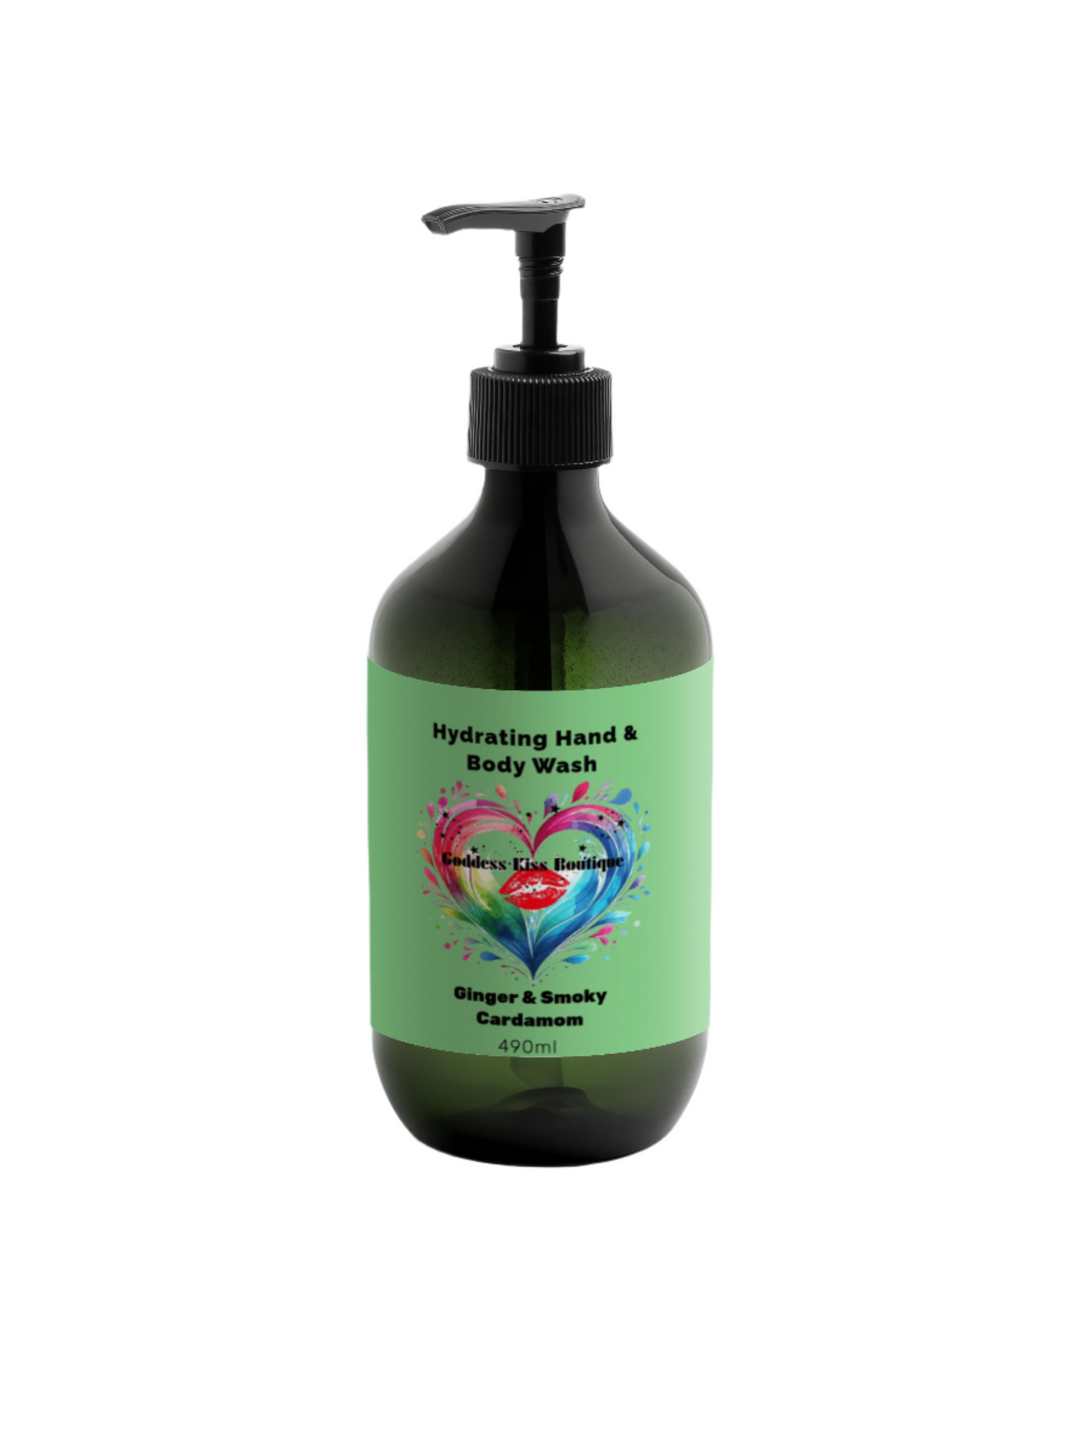 Hand & Body Wash with Ginger & Smoky Cardamom - Hydrating Betaine Formula